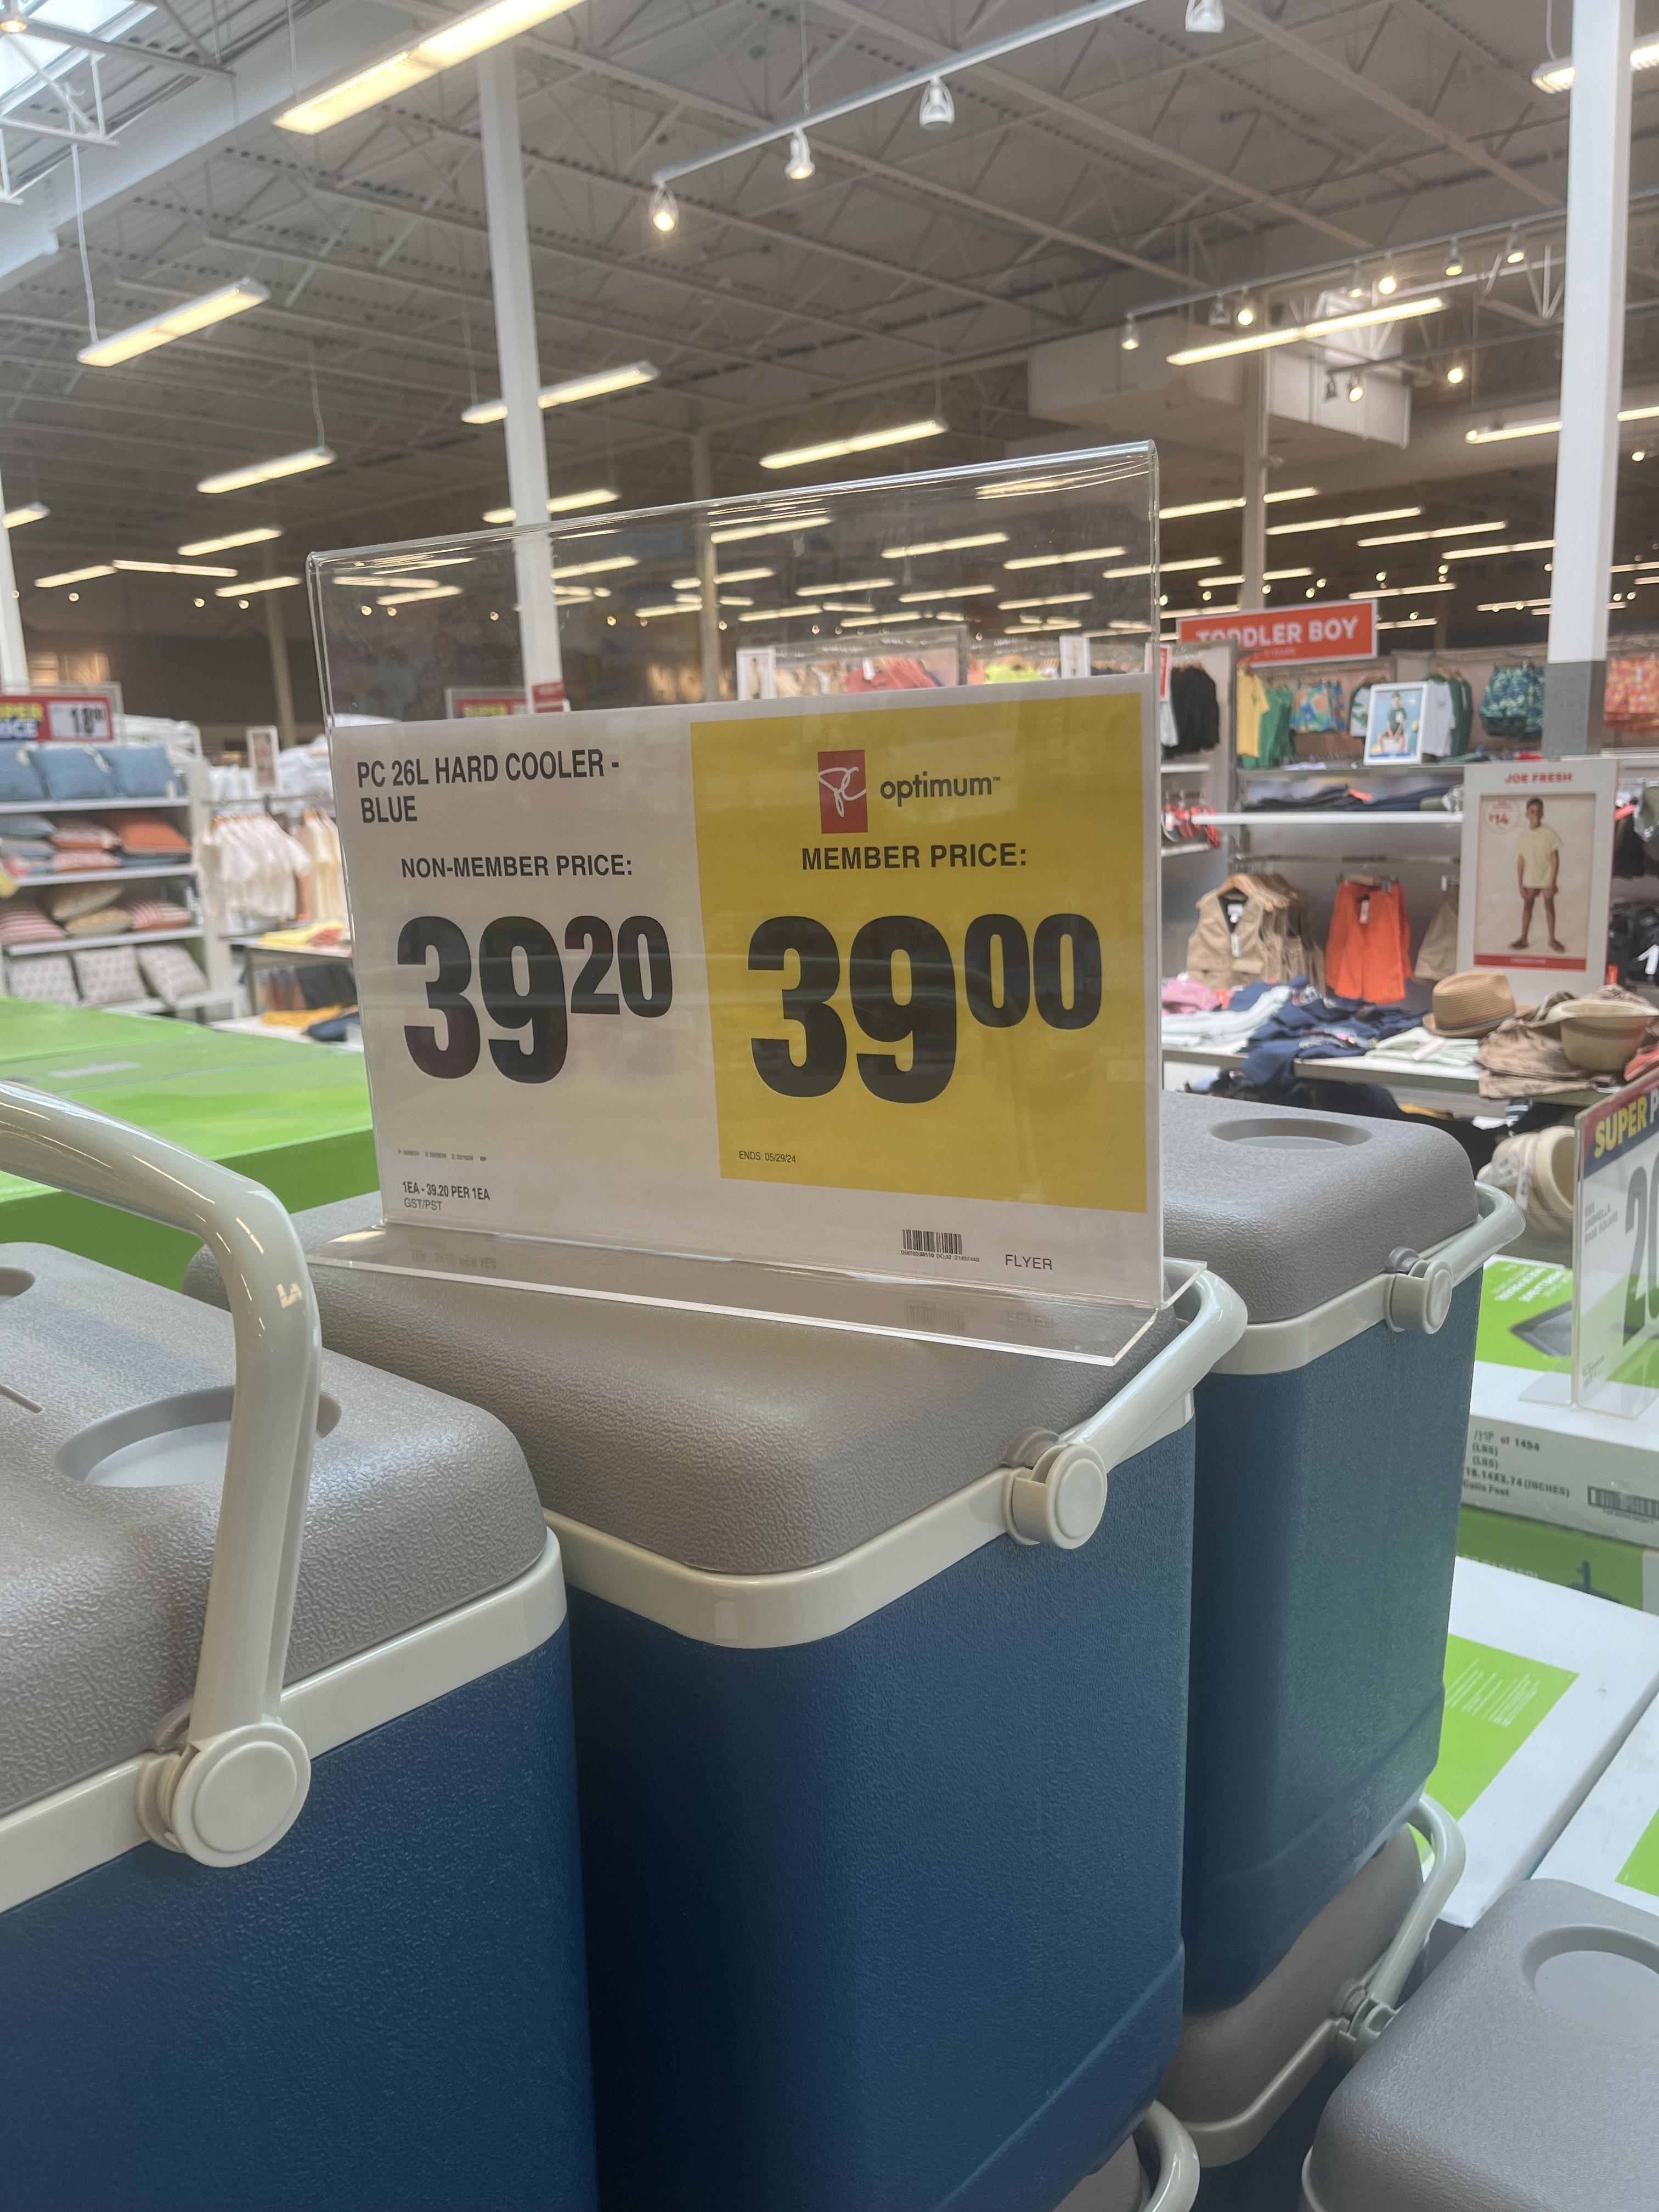 Sign showing a 20 cent discount on a cooler for members at a store